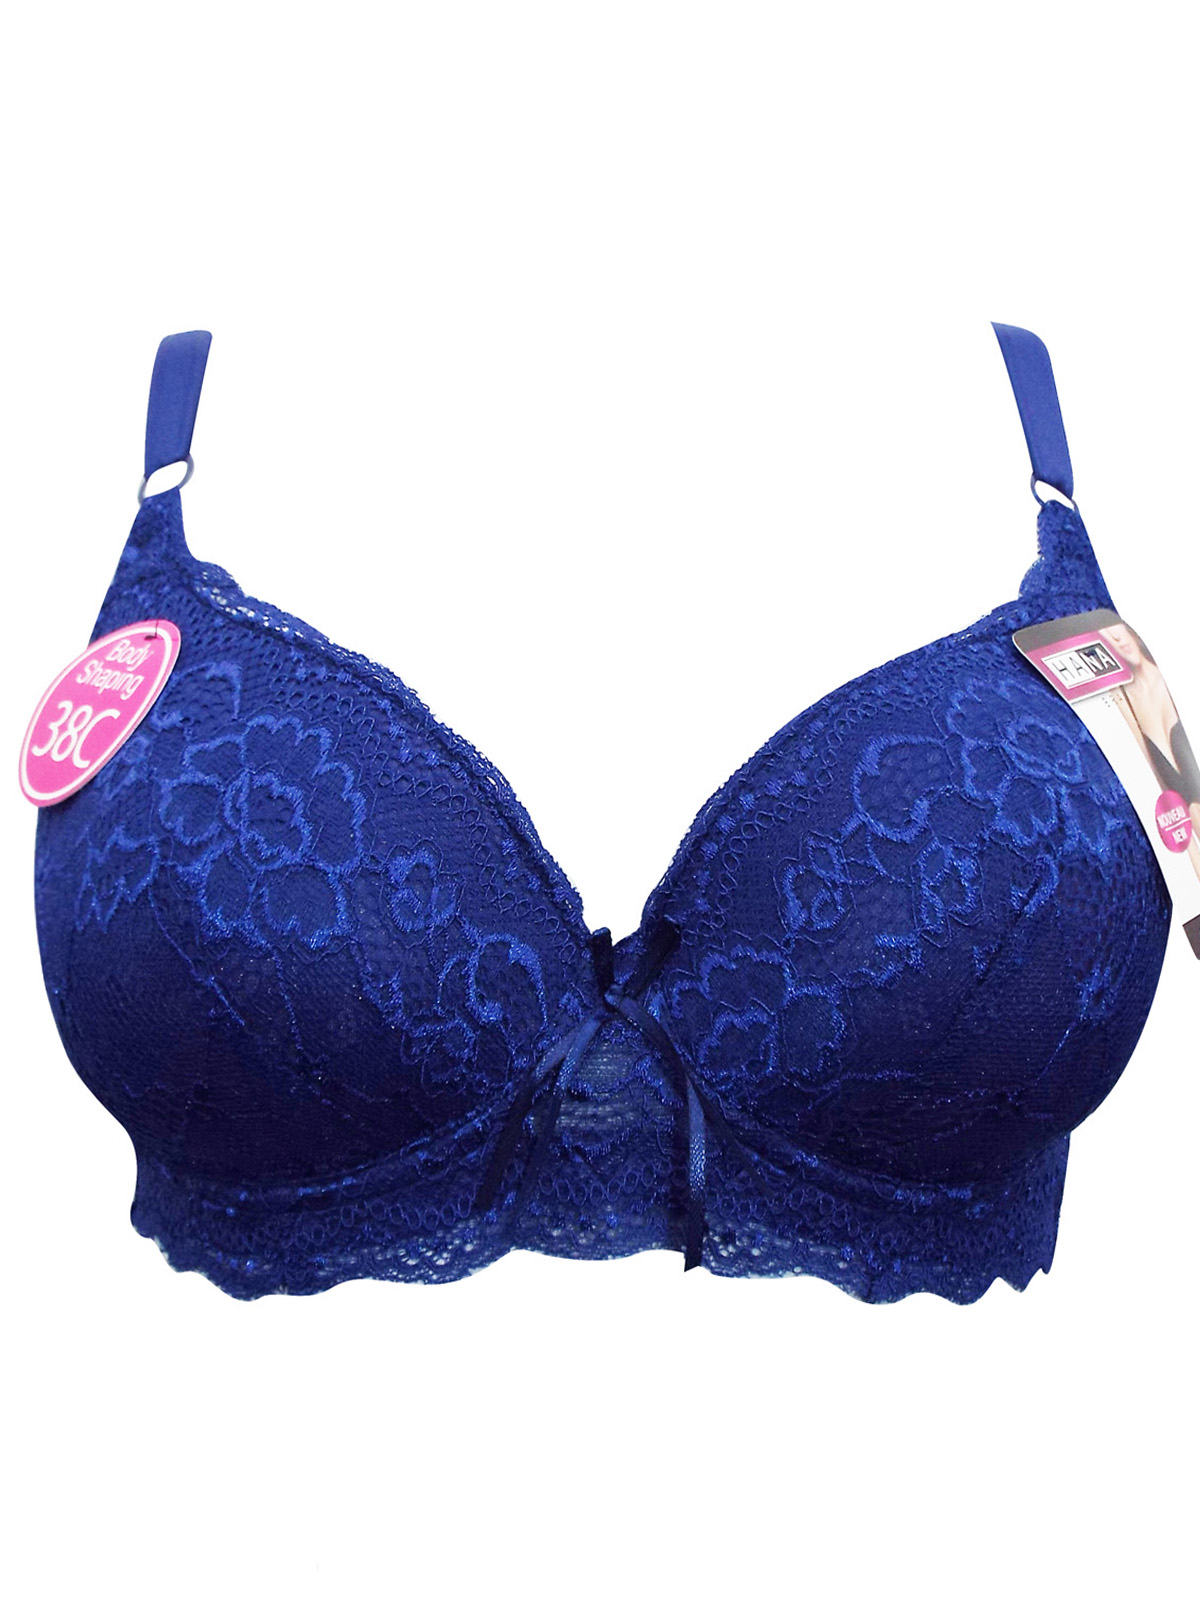 Hana - - Hana BLUE Floral Lace Padded & Wired Full Cup Bra - Size